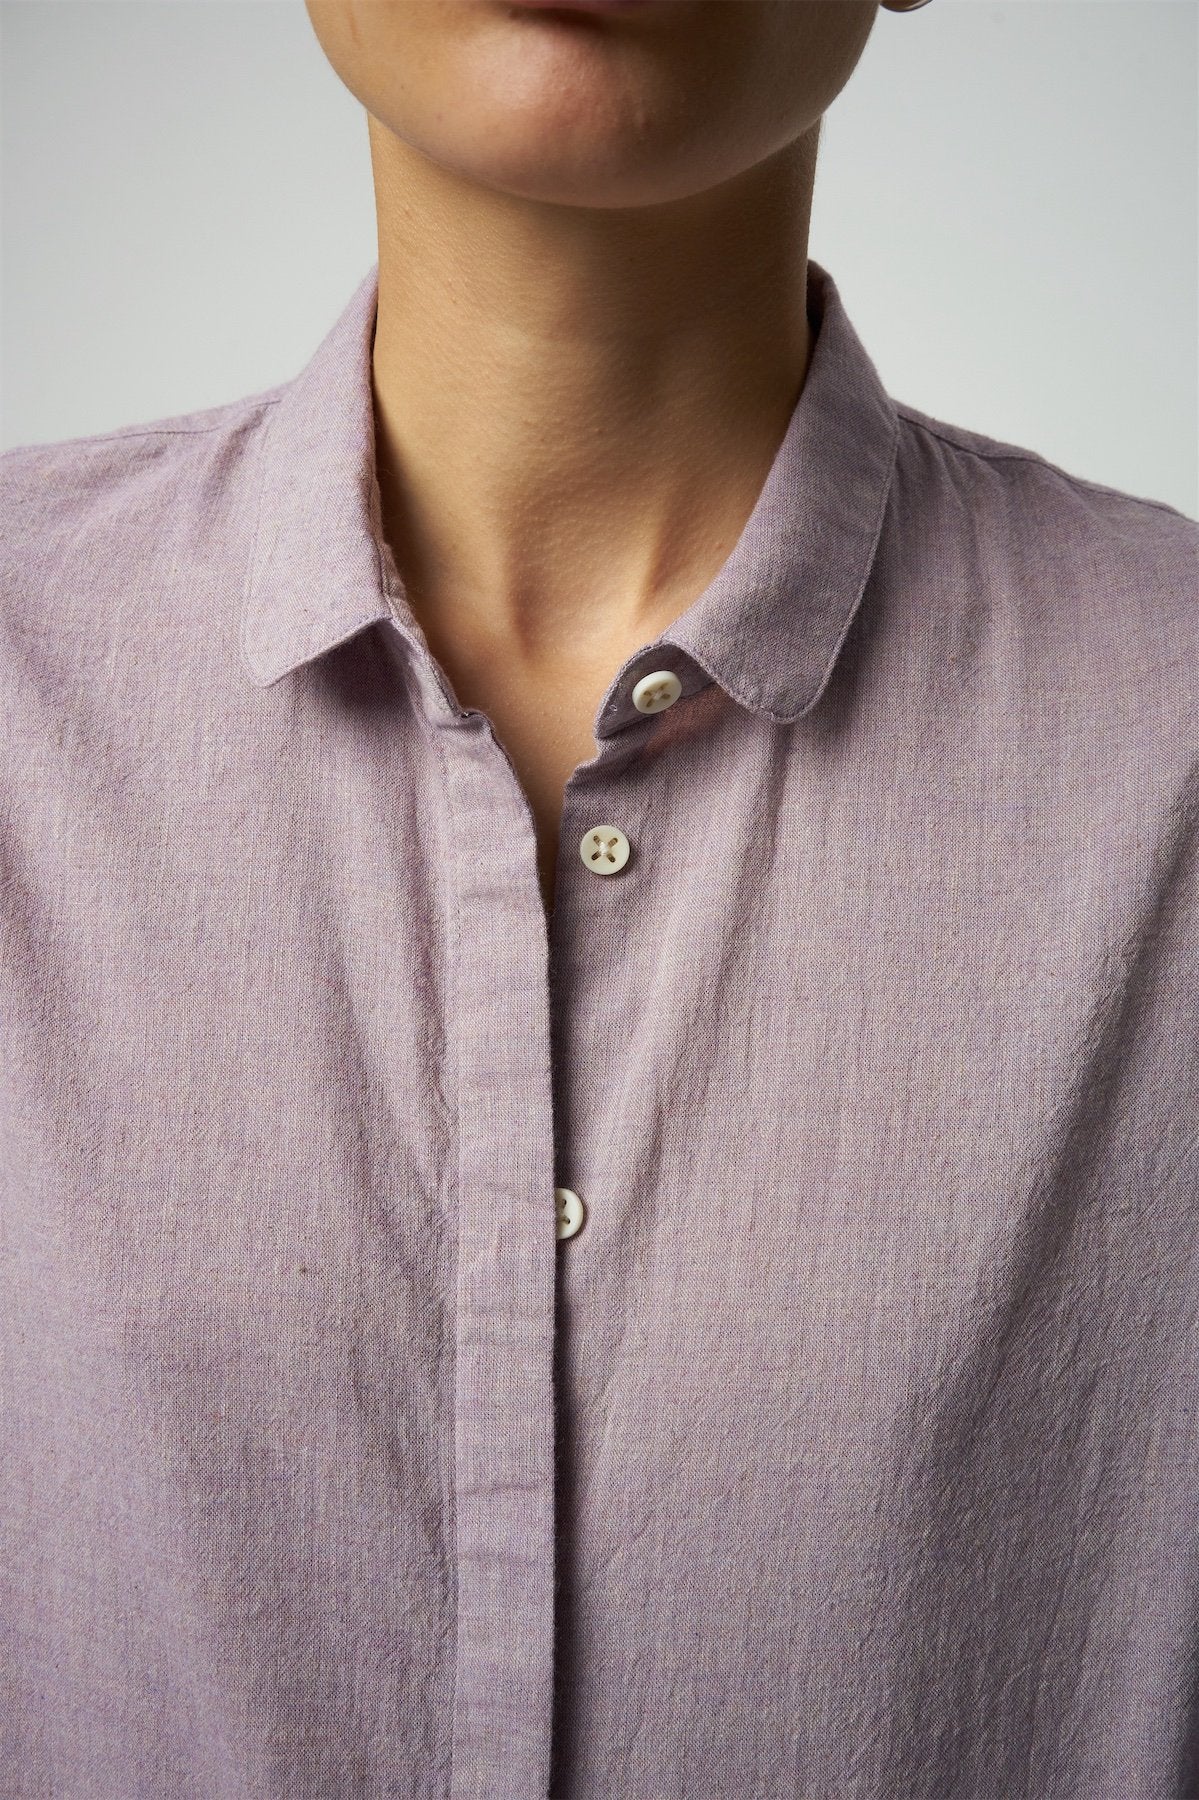 Cute Round Collar Shirt in a Purple Heather Grey Japanese Organic Cotton and Linen